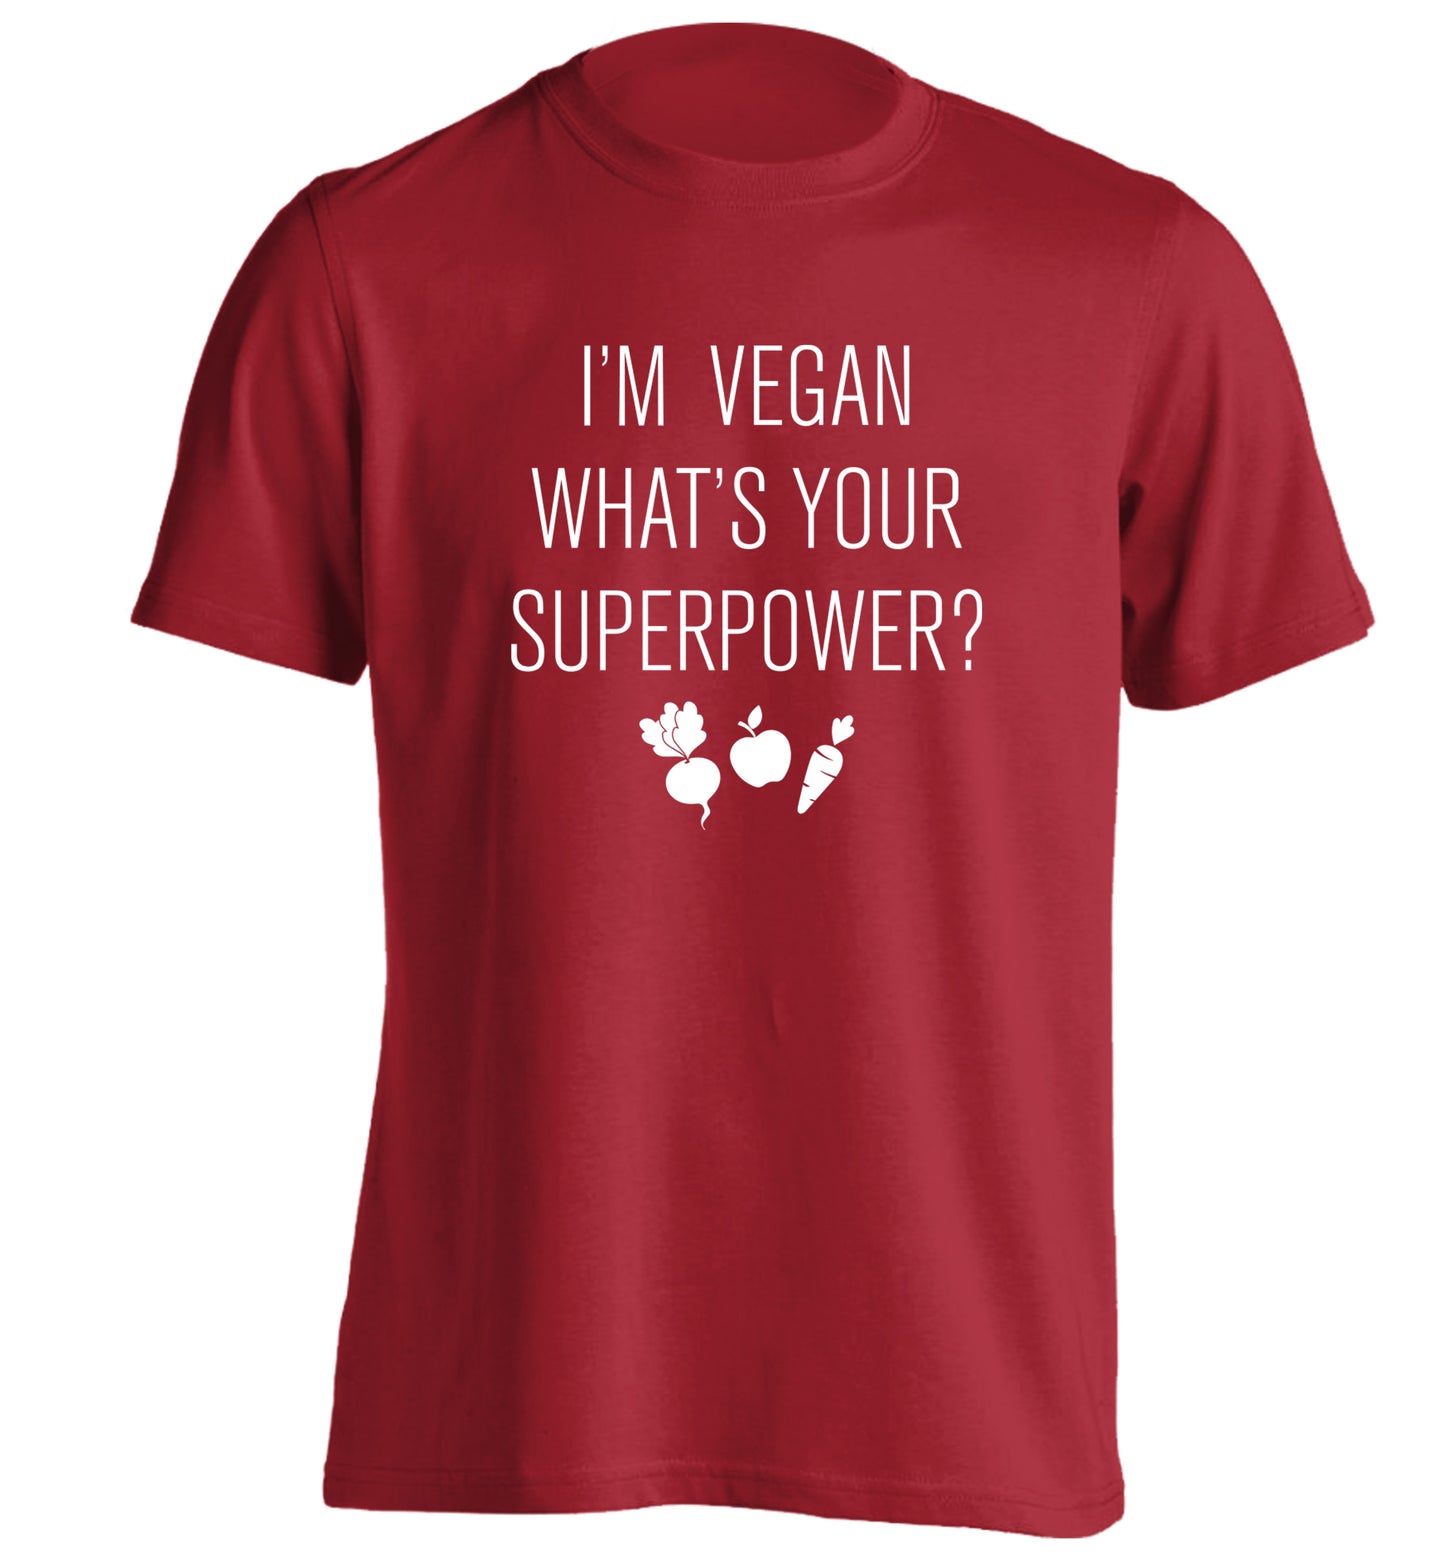 I'm Vegan What's Your Superpower? adults unisex red Tshirt 2XL